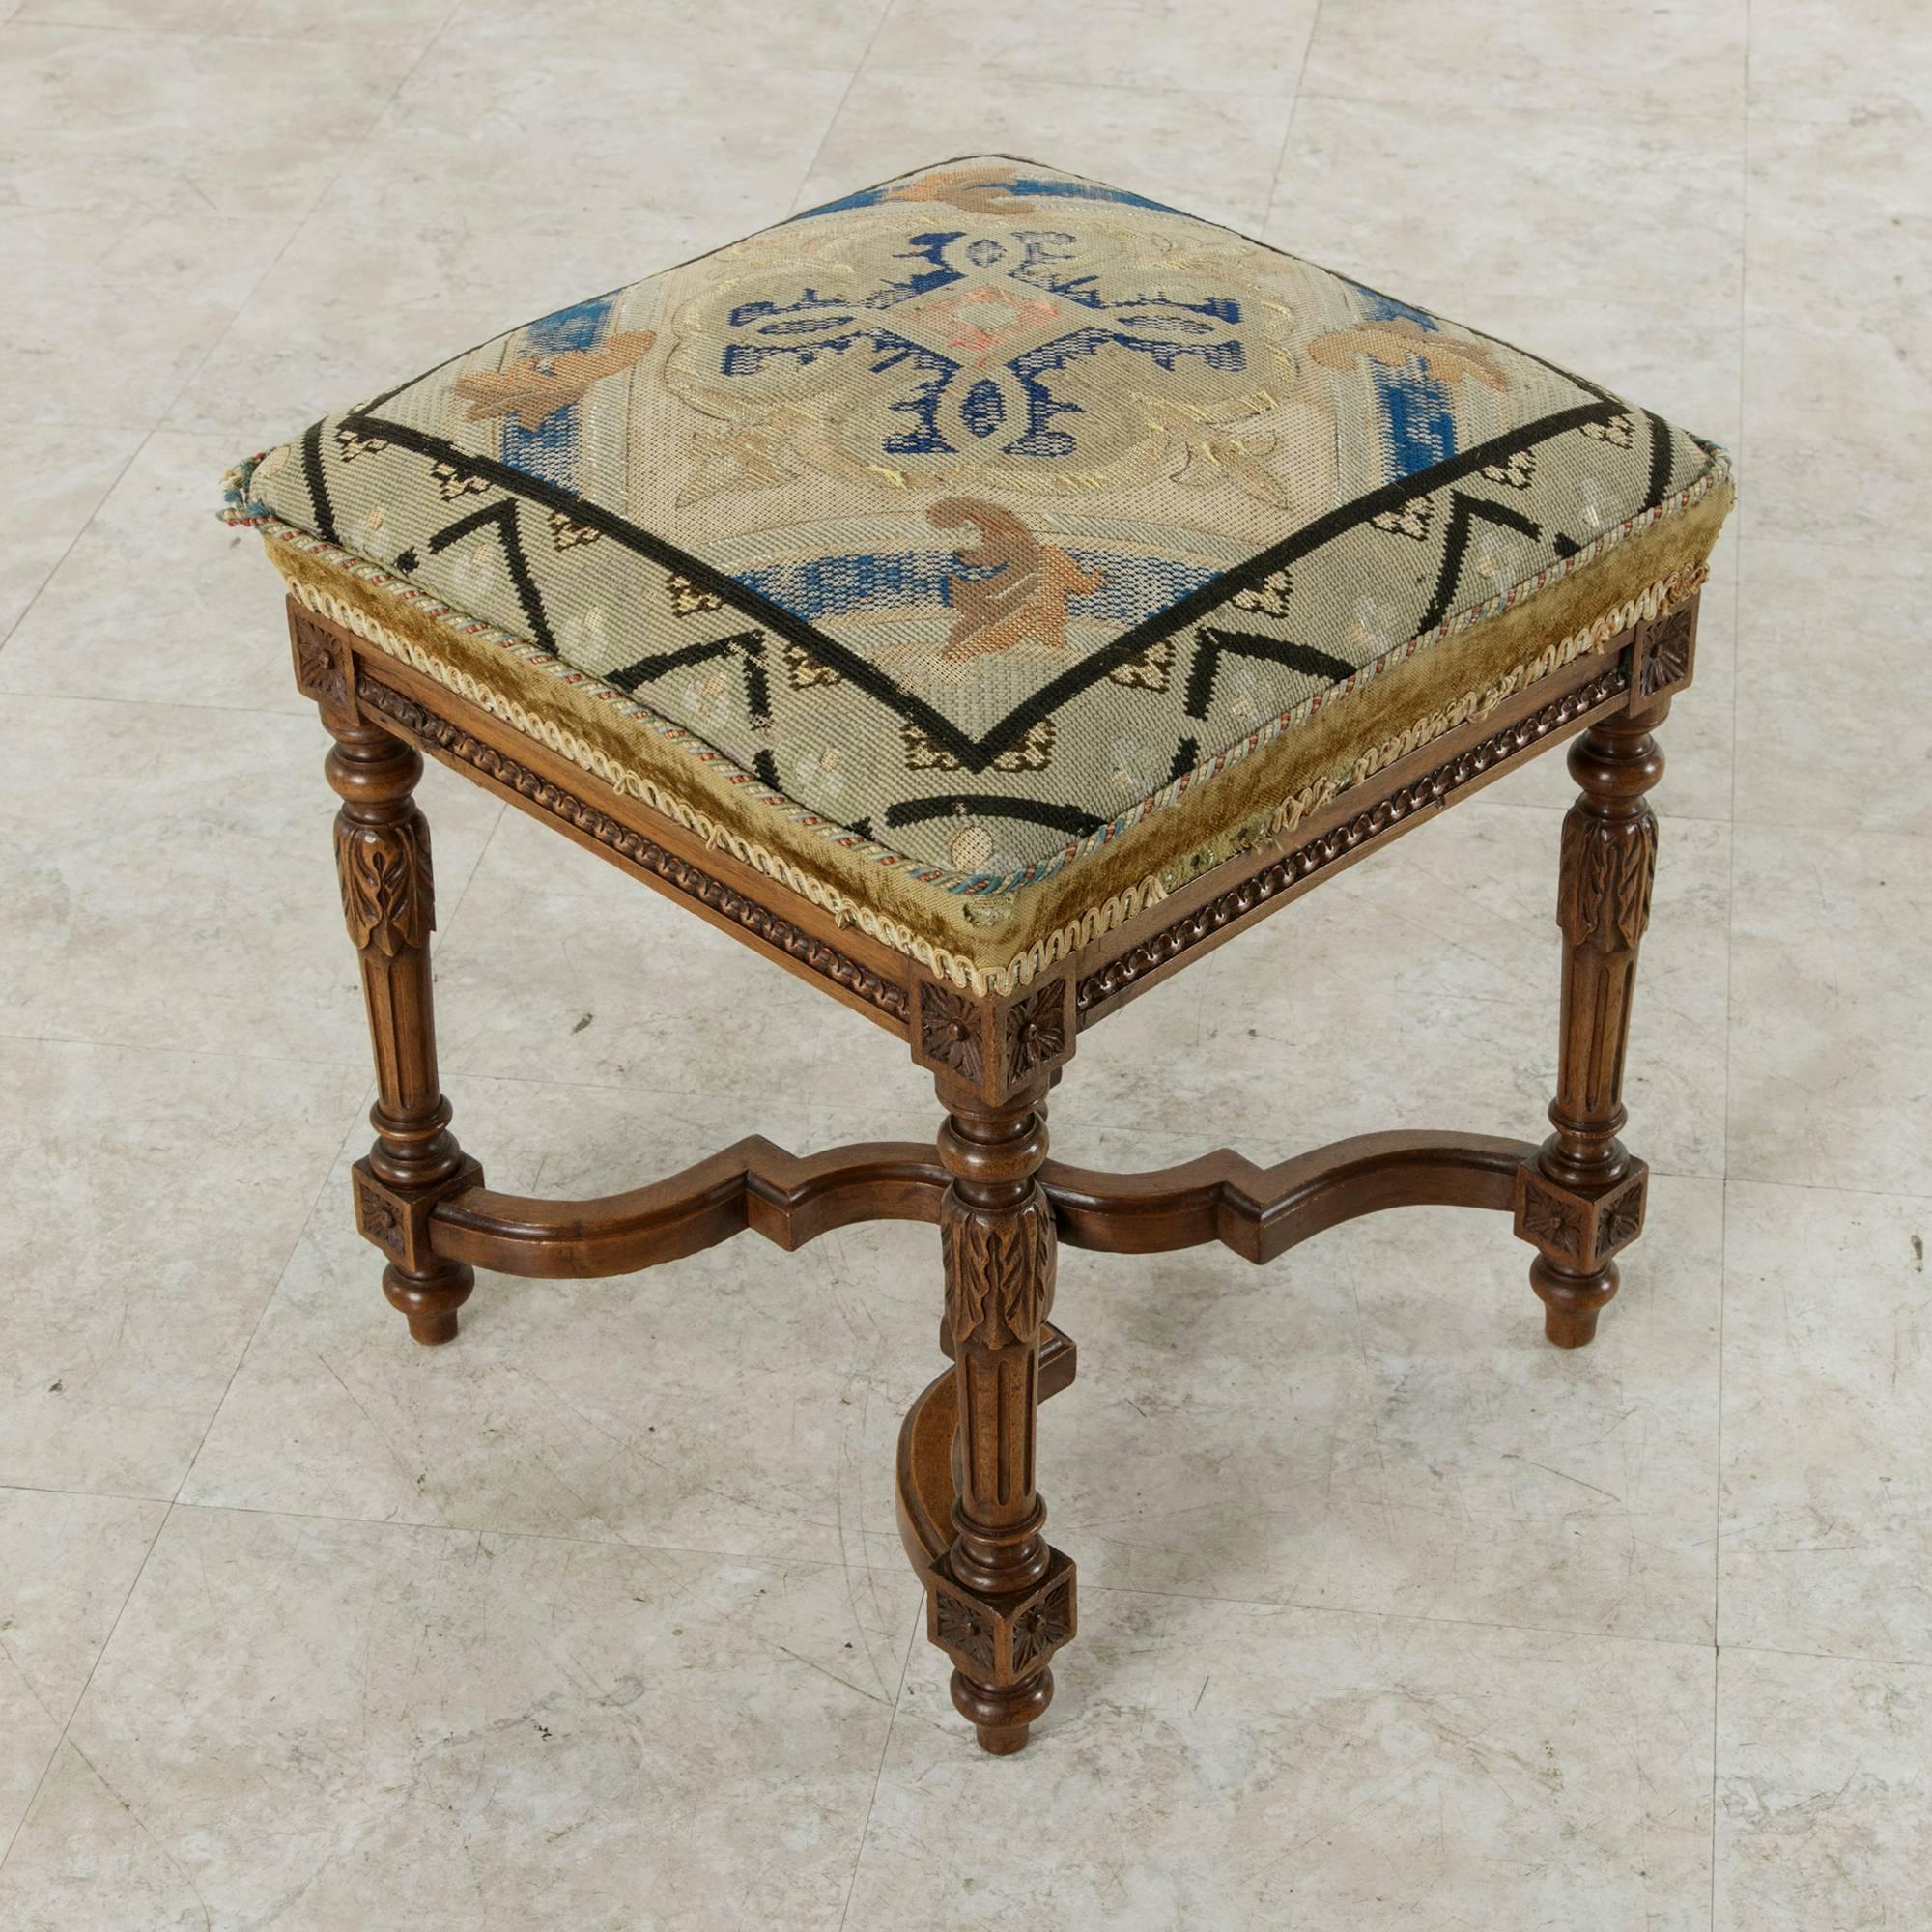 This 19th century hand-carved walnut stool in the Louis XVI style features fluted legs with acanthus leaf carvings at the top and rosettes on the die joints. The elegantly curved X-stretcher with central finial adds stability to this finely detailed